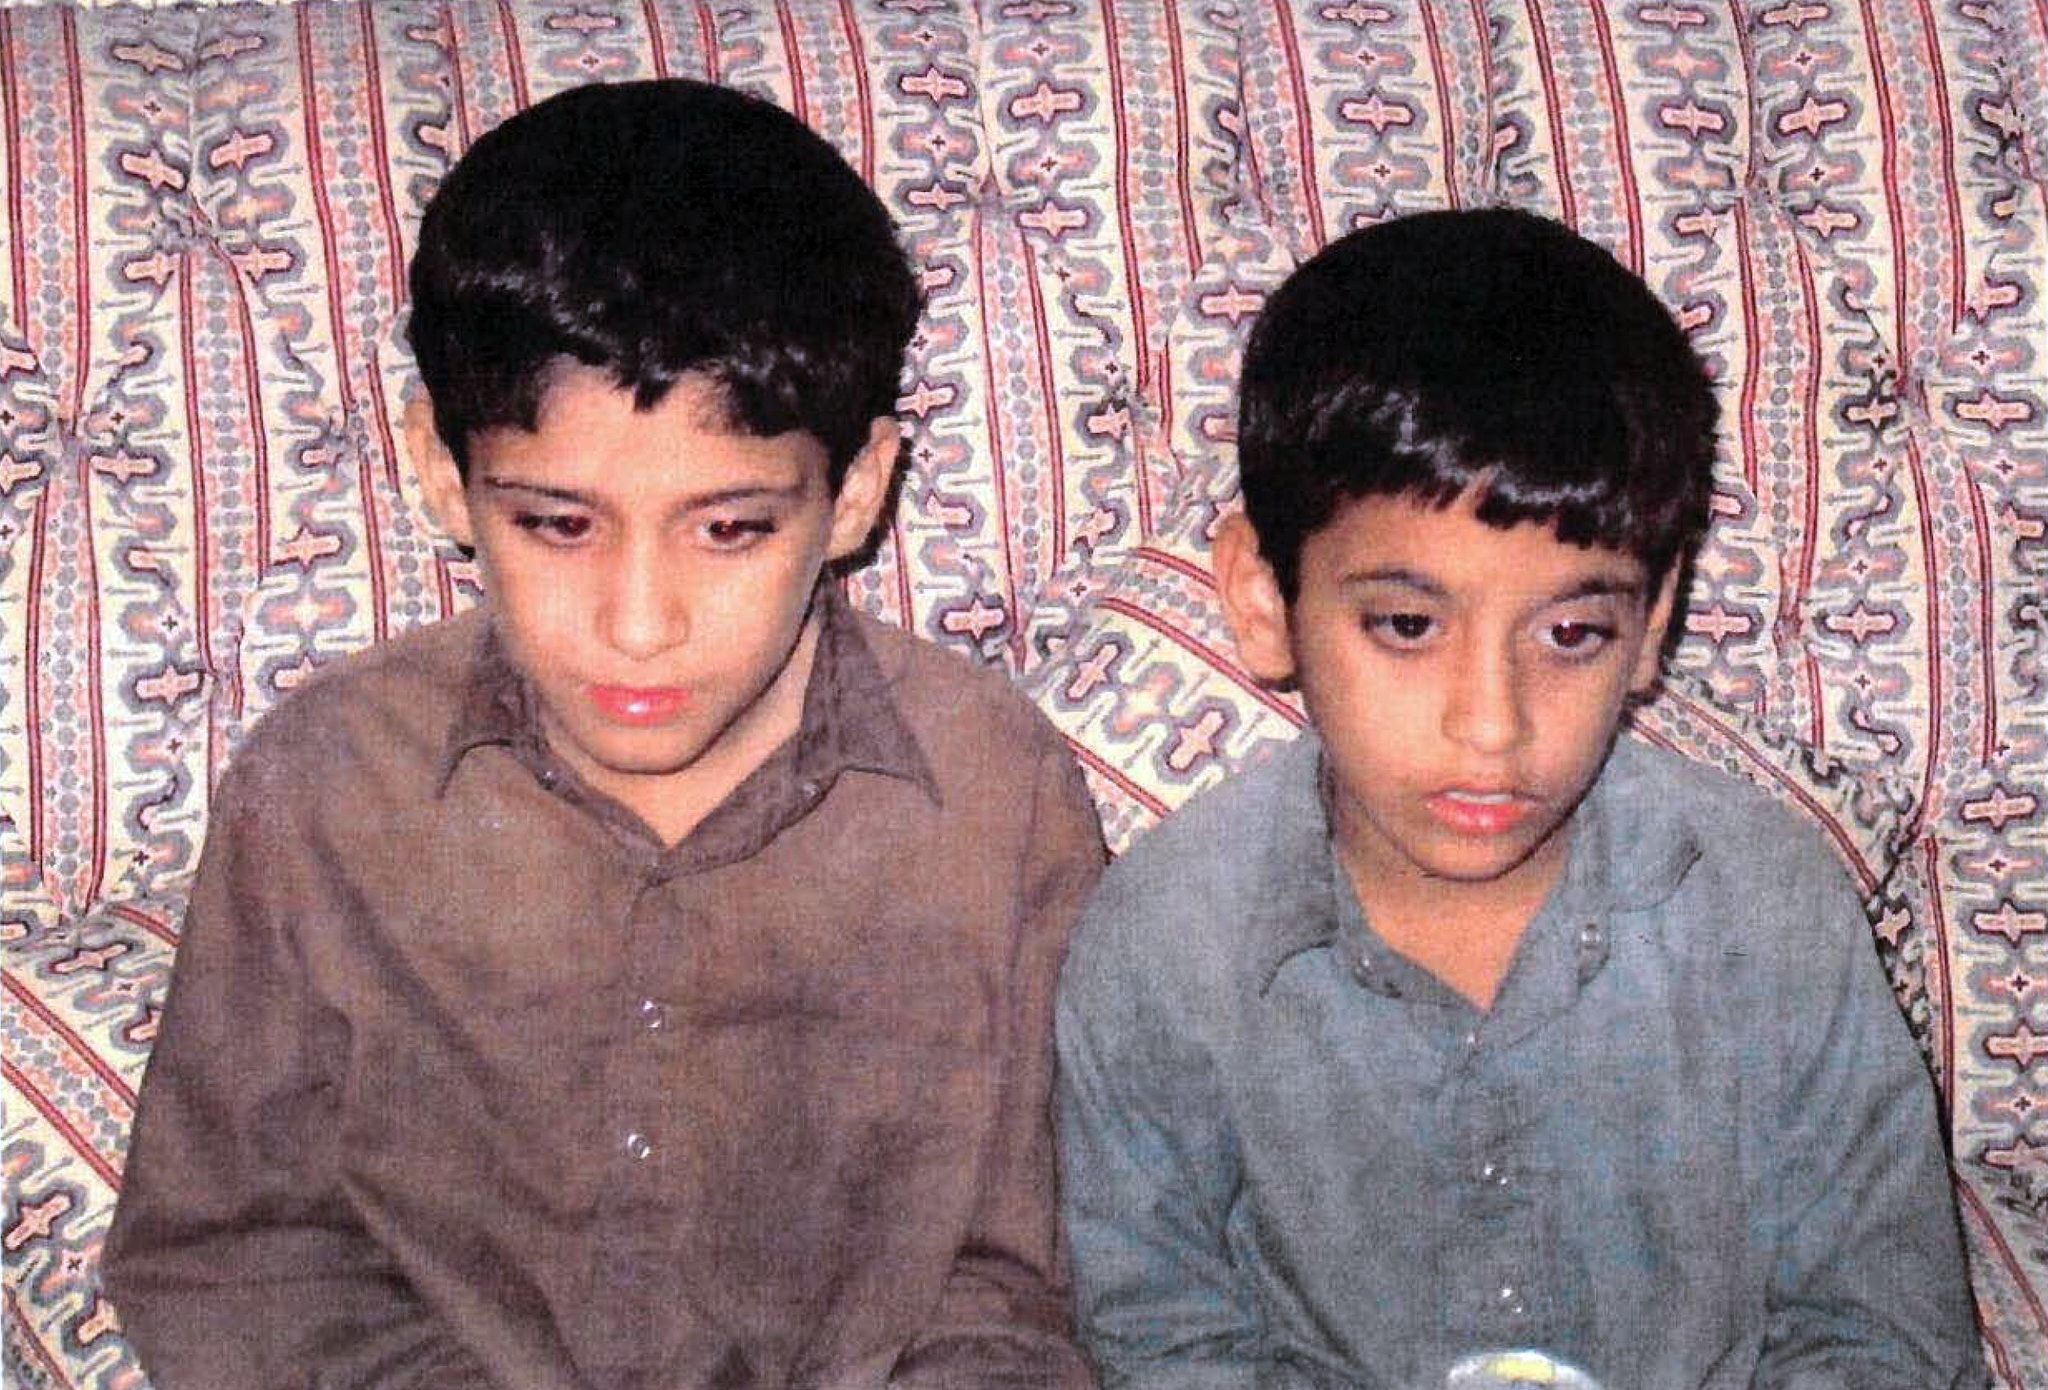 A photo of Khalid Shaikh Mohammed’s two sons, estimated to have been taken in the early 2000s, was released by the Office of Military Commissions in a 2019 case filing with no specific information about the photographer or where or when it was taken. Image courtesy of Office of Military Commissions. 